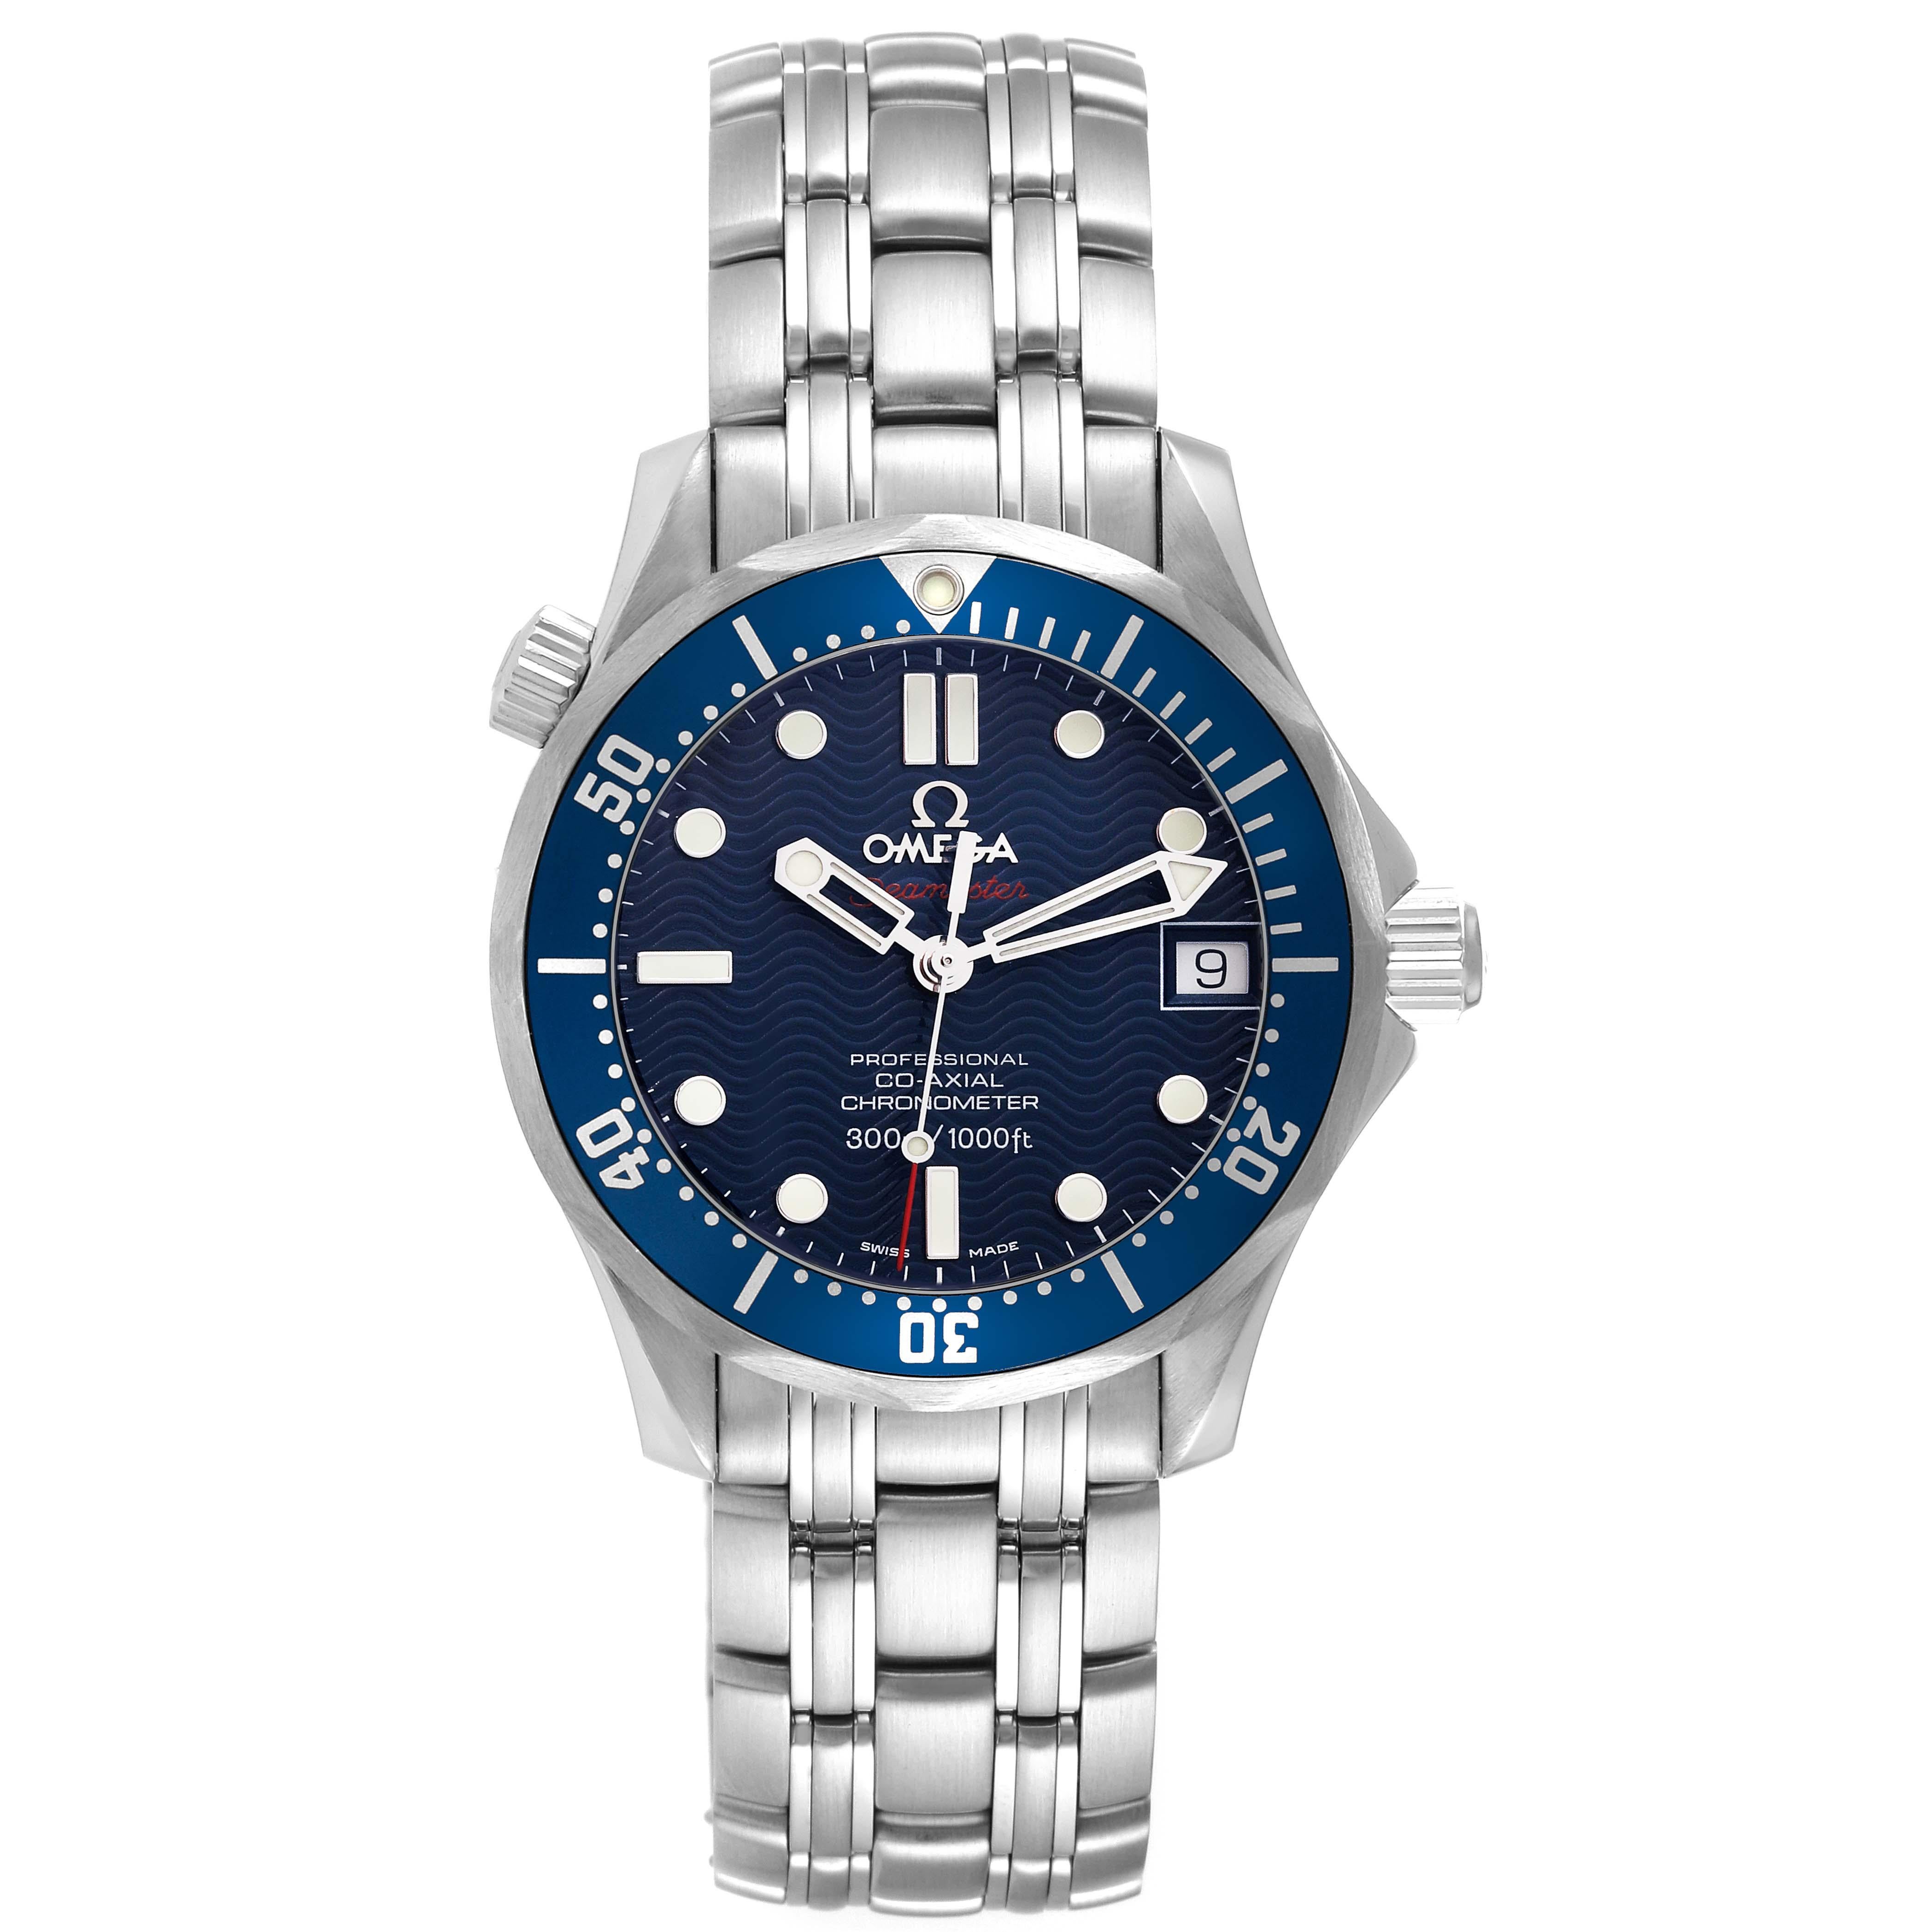 Omega Seamaster Midsize 36mm Co-Axial Steel Mens Watch 2222.80.00 Box Card. Automatic self-winding Co-Axial movement. Stainless steel case 36mm in diameter. Helium escape valve at 10 o'clock. Omega logo on the crown. Unidirectional rotating bezel